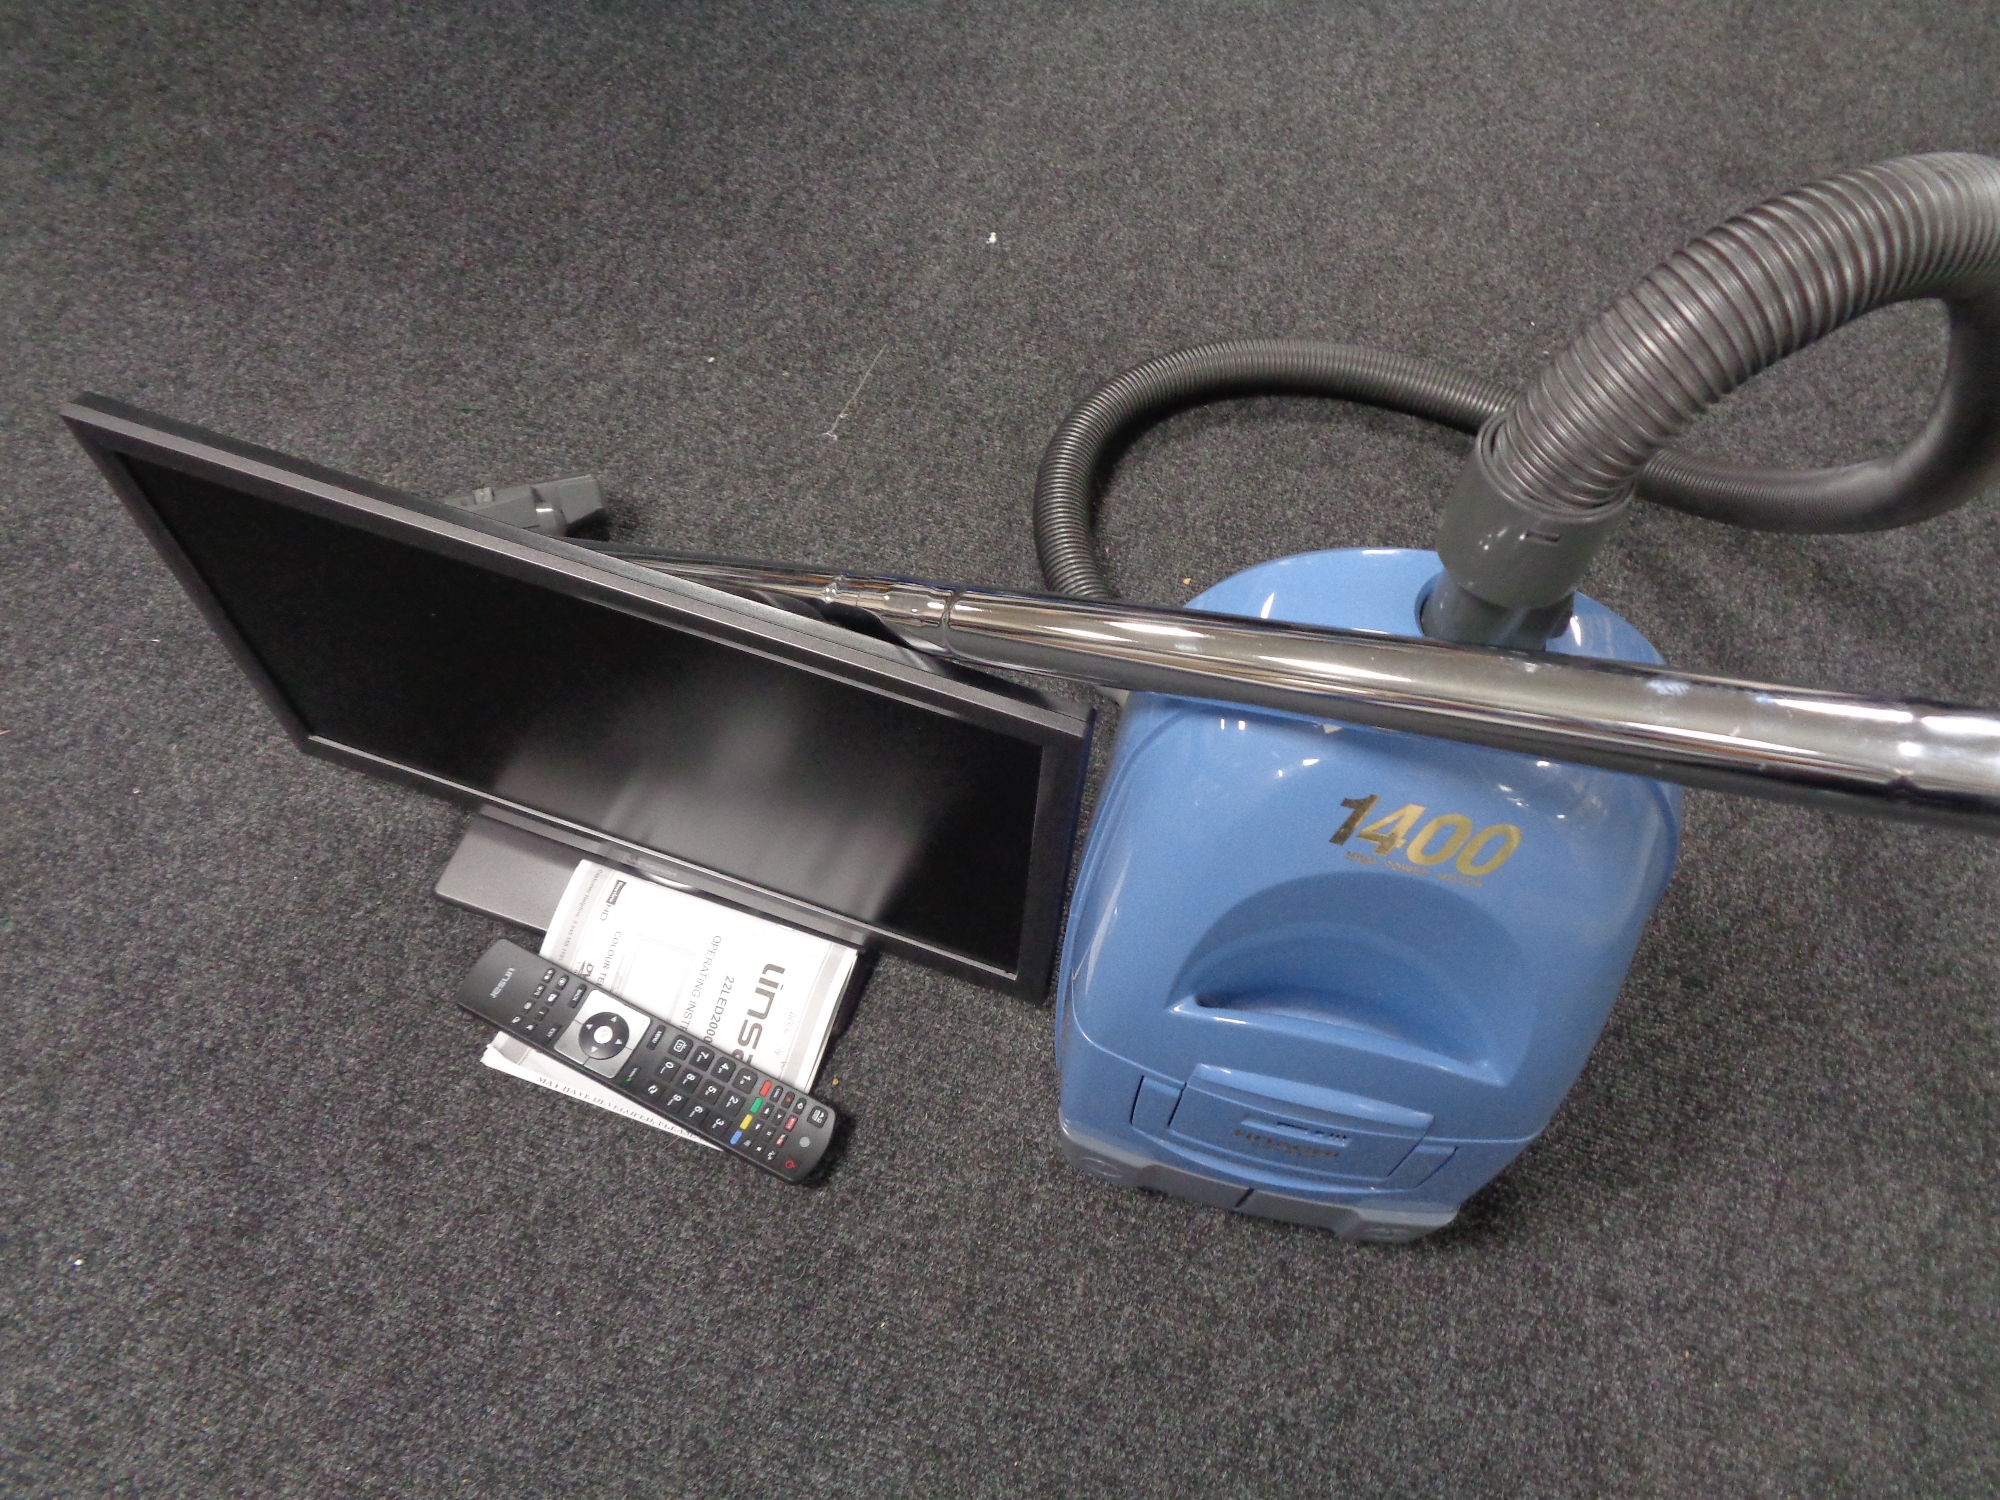 A Linsar 22 inch LED TV with remote and a Hitachi cylinder vacuum